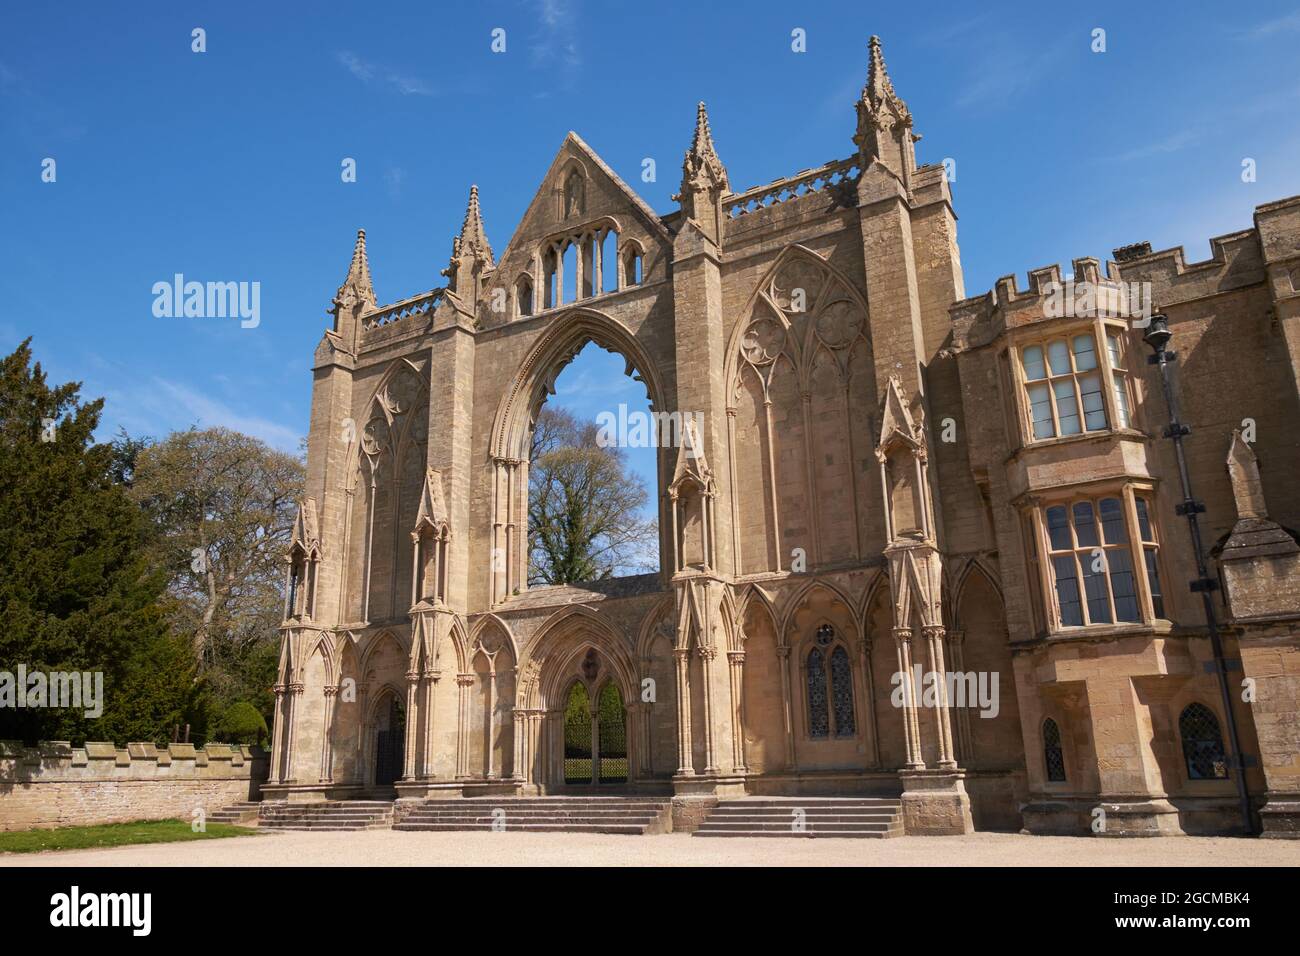 The ruins of the priory church of Newstead Abbey, Nottinghamshire, UK. Stock Photo